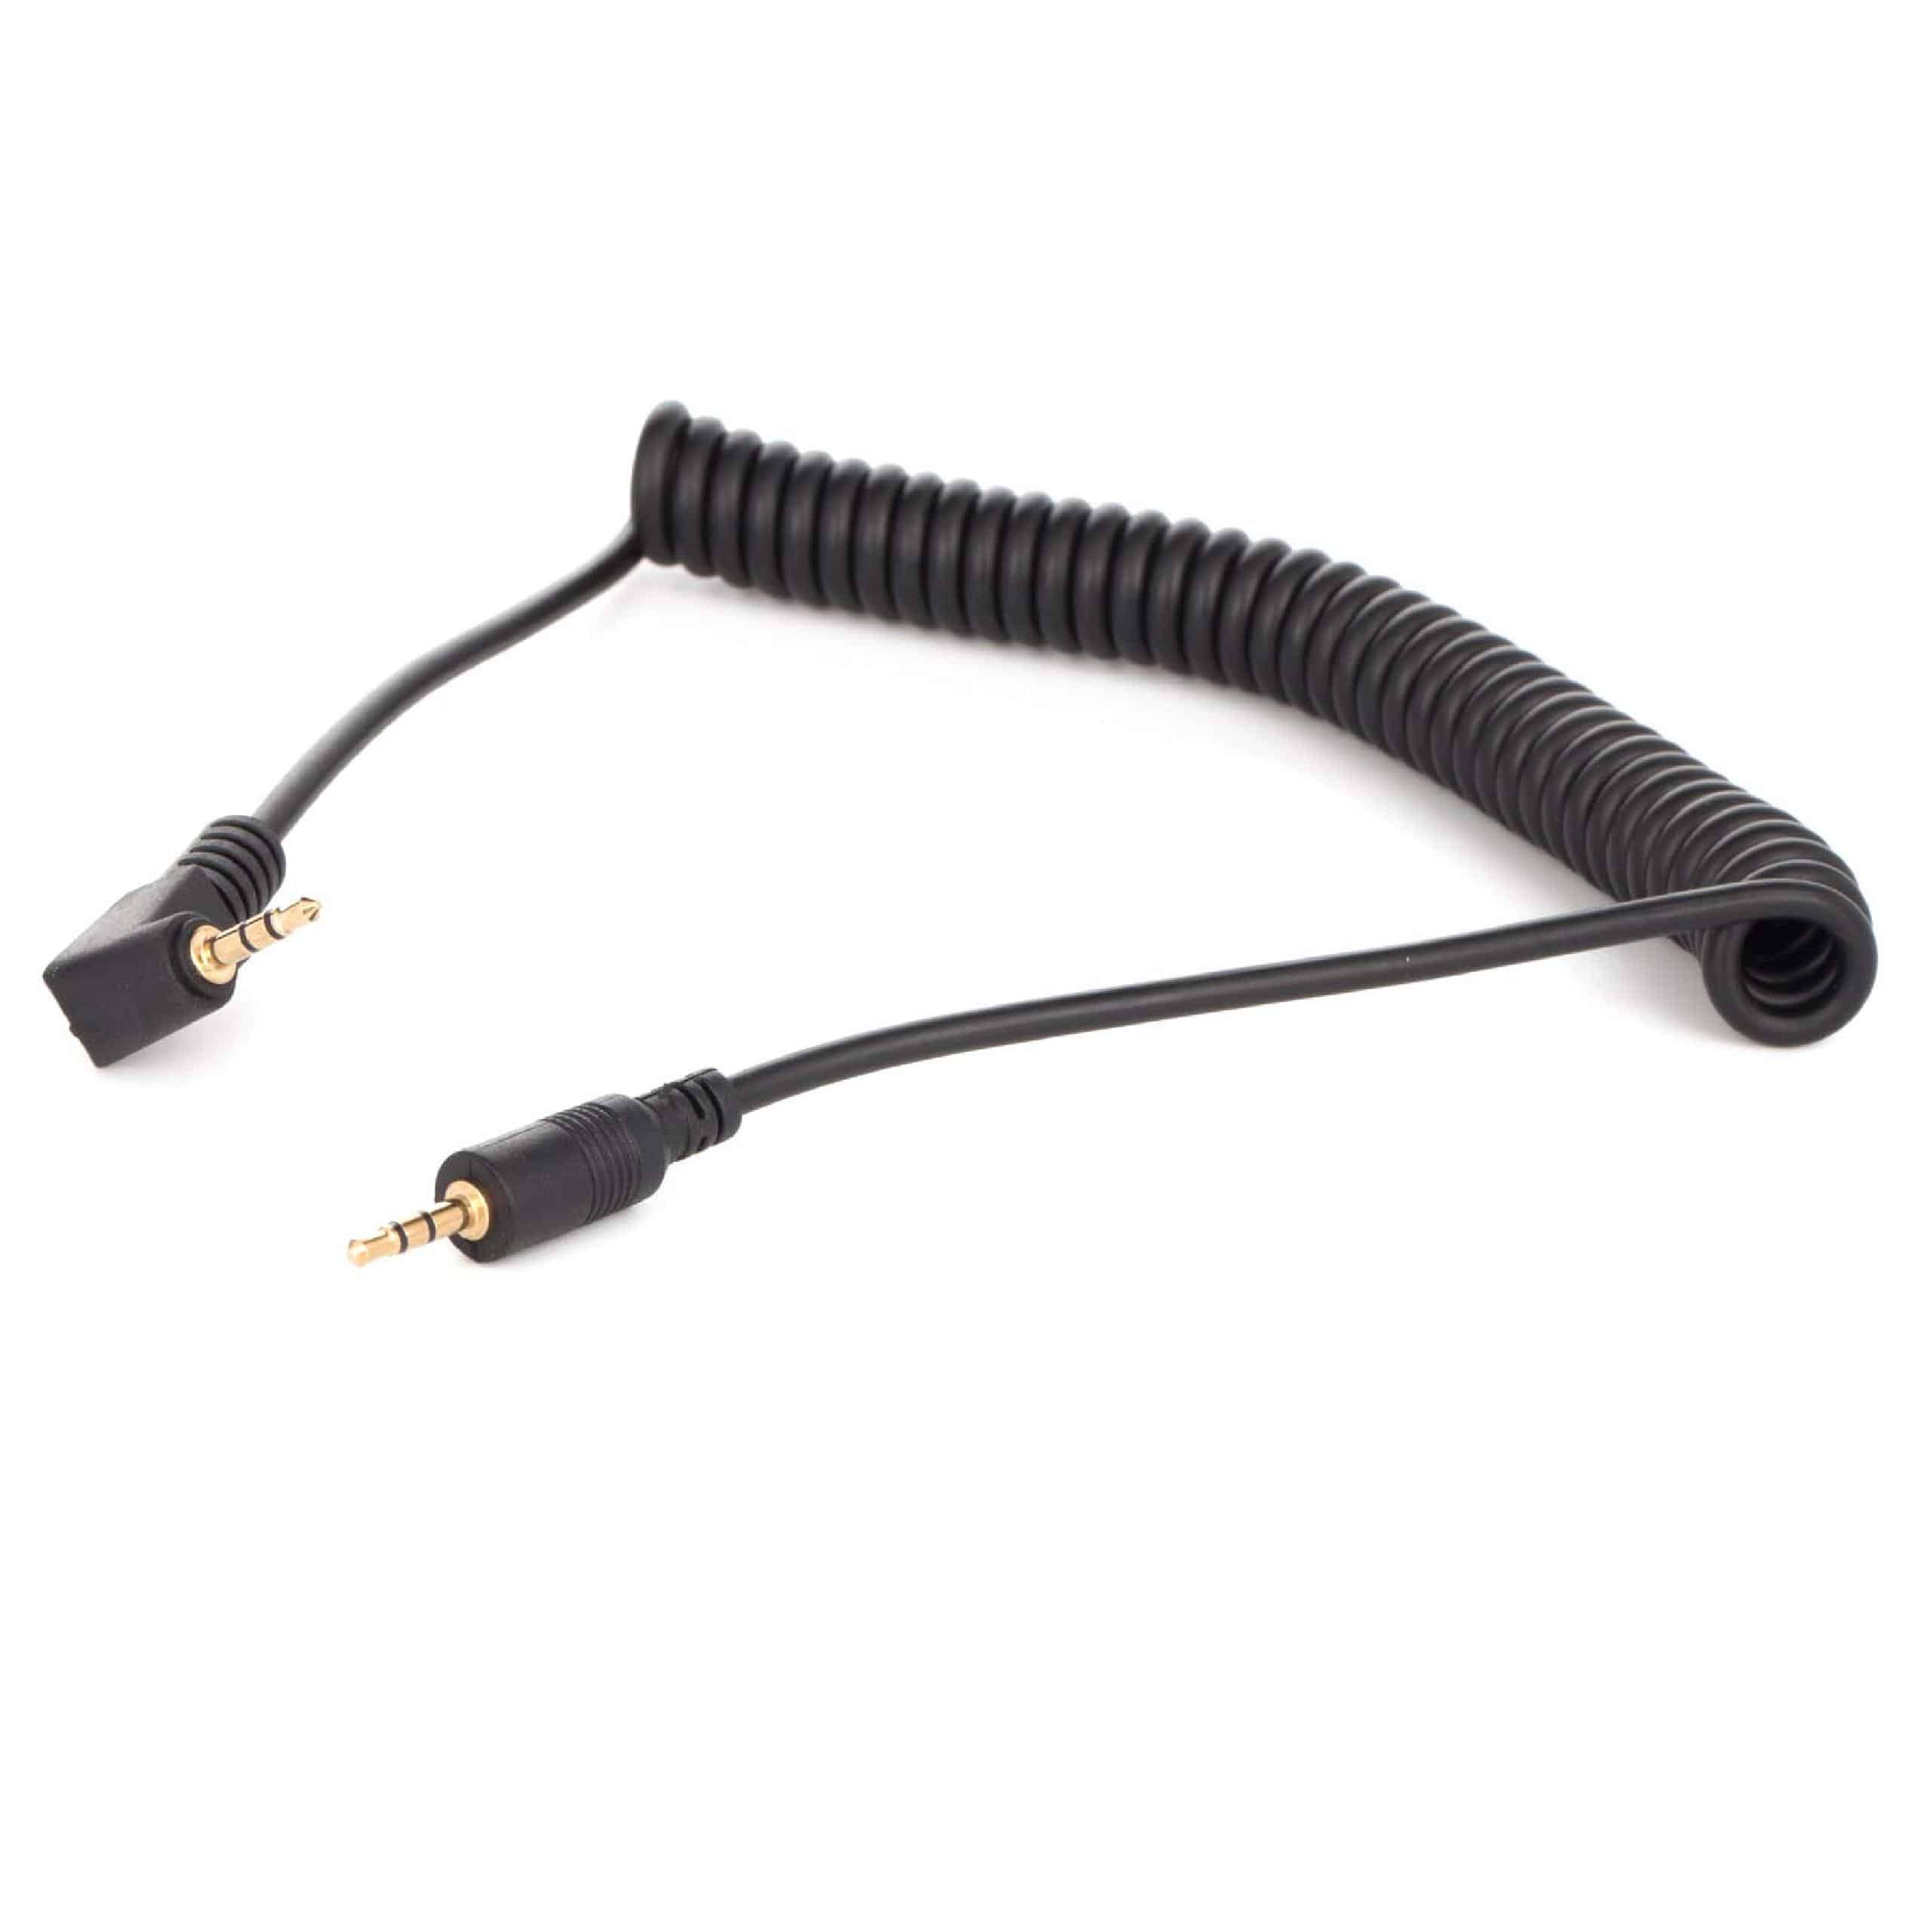 vhbw Cable e.g. for Pentax IST DL Camera, DSLR - Connecting Cable, 120 cm, Spiral Cord